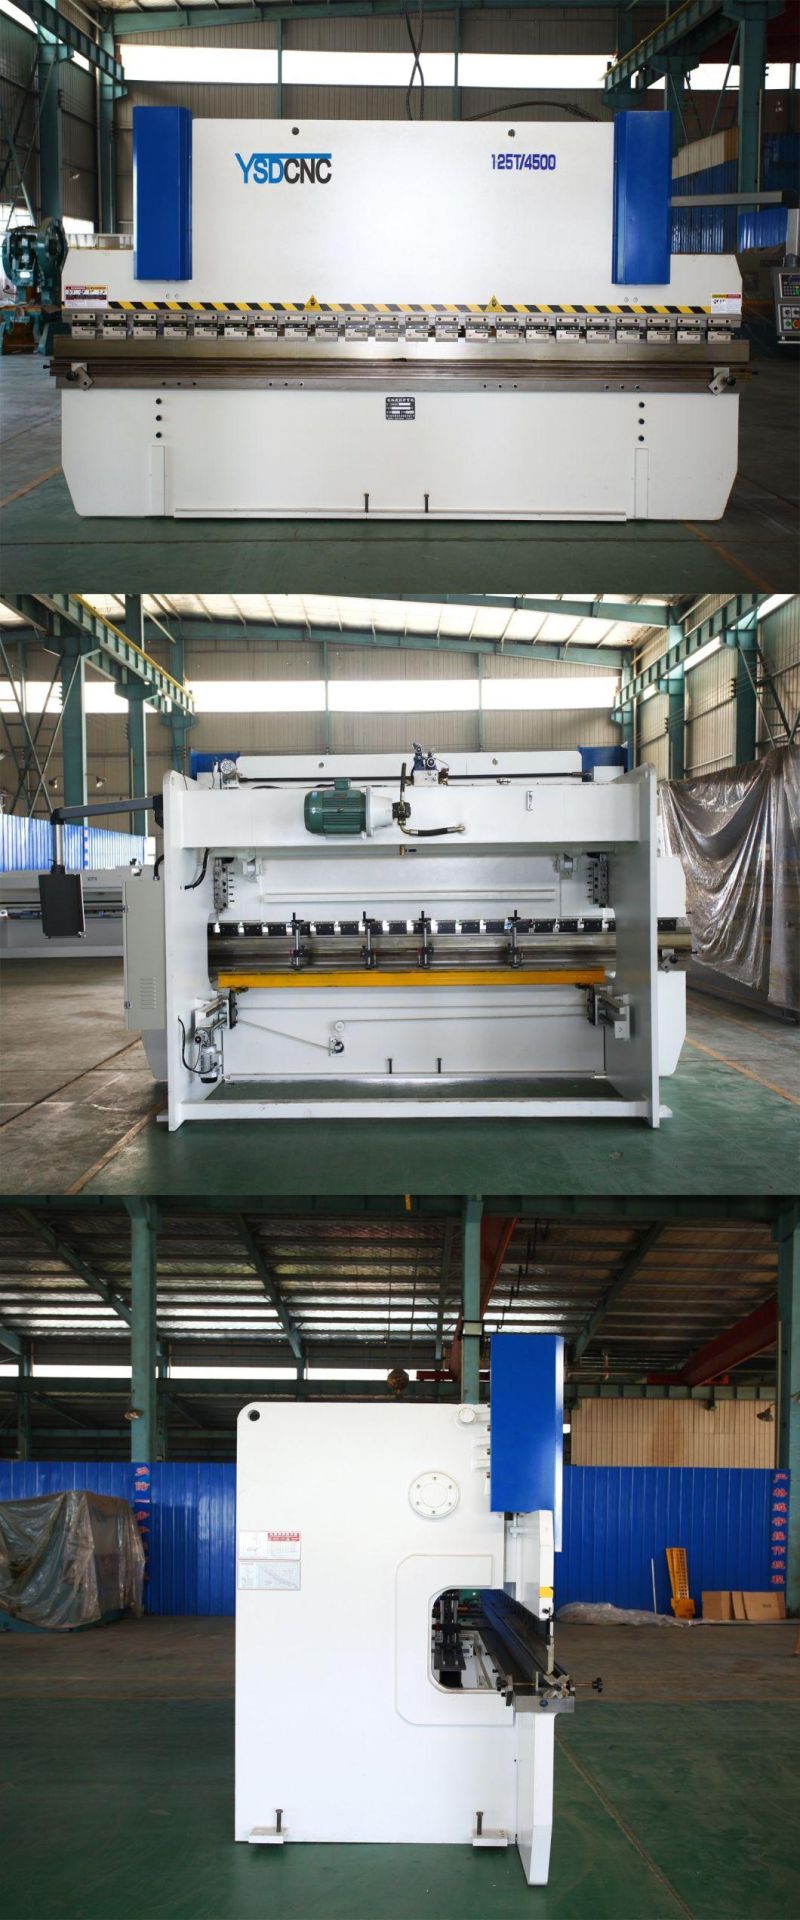 Stainless Steel Hydraulic Press Brake with Delem Da41s Controller